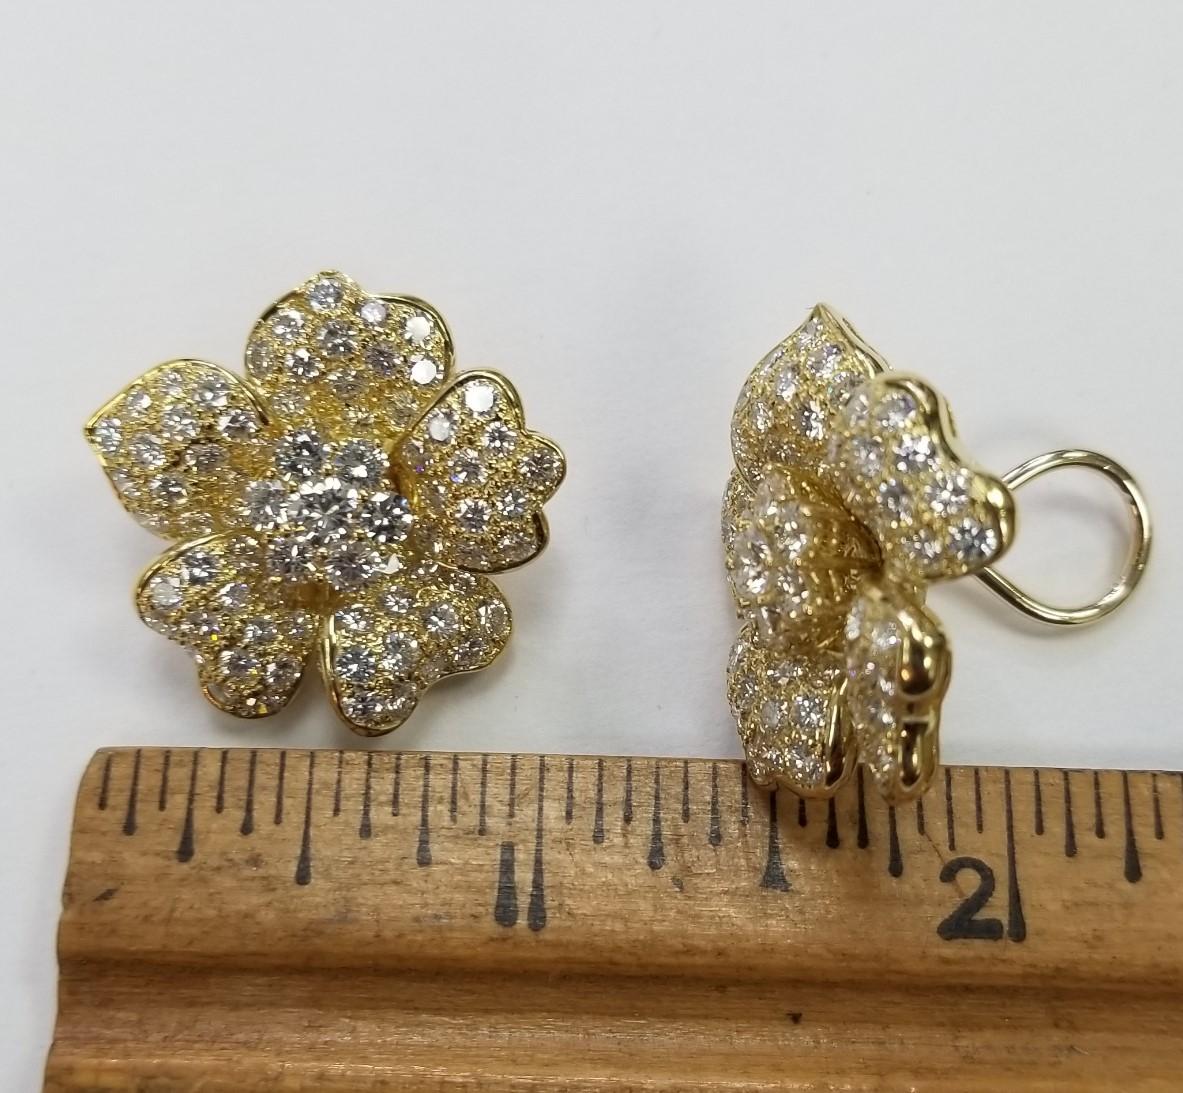 This is a  pair of gorgeous Vintage 18 Karat Yellow Gold Flower Earrings with Diamonds containing 154 round full cut diamonds; color 